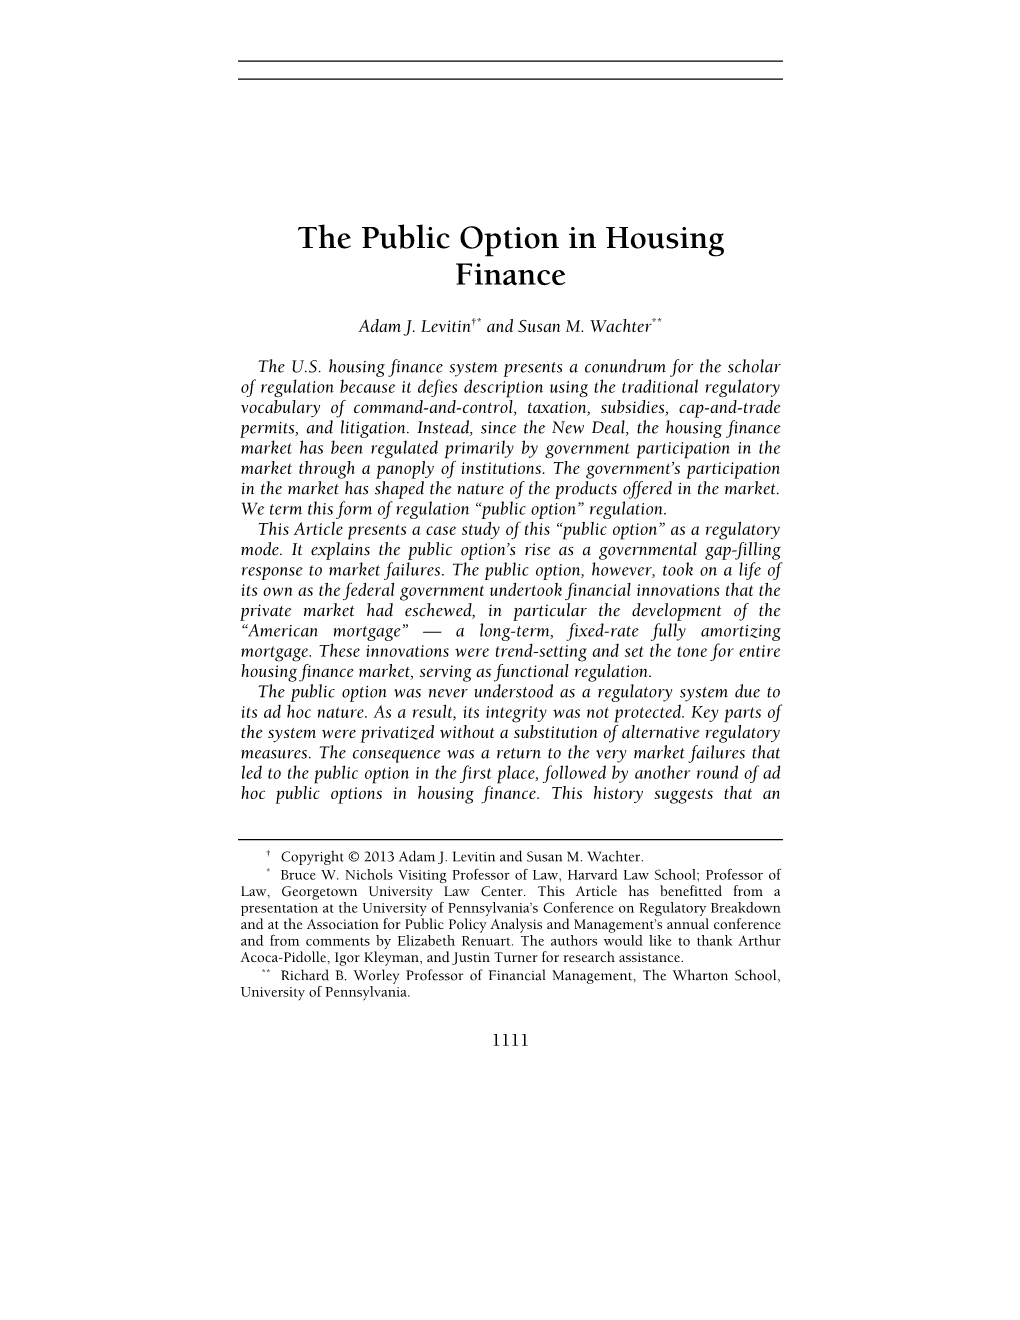 The Public Option in Housing Finance